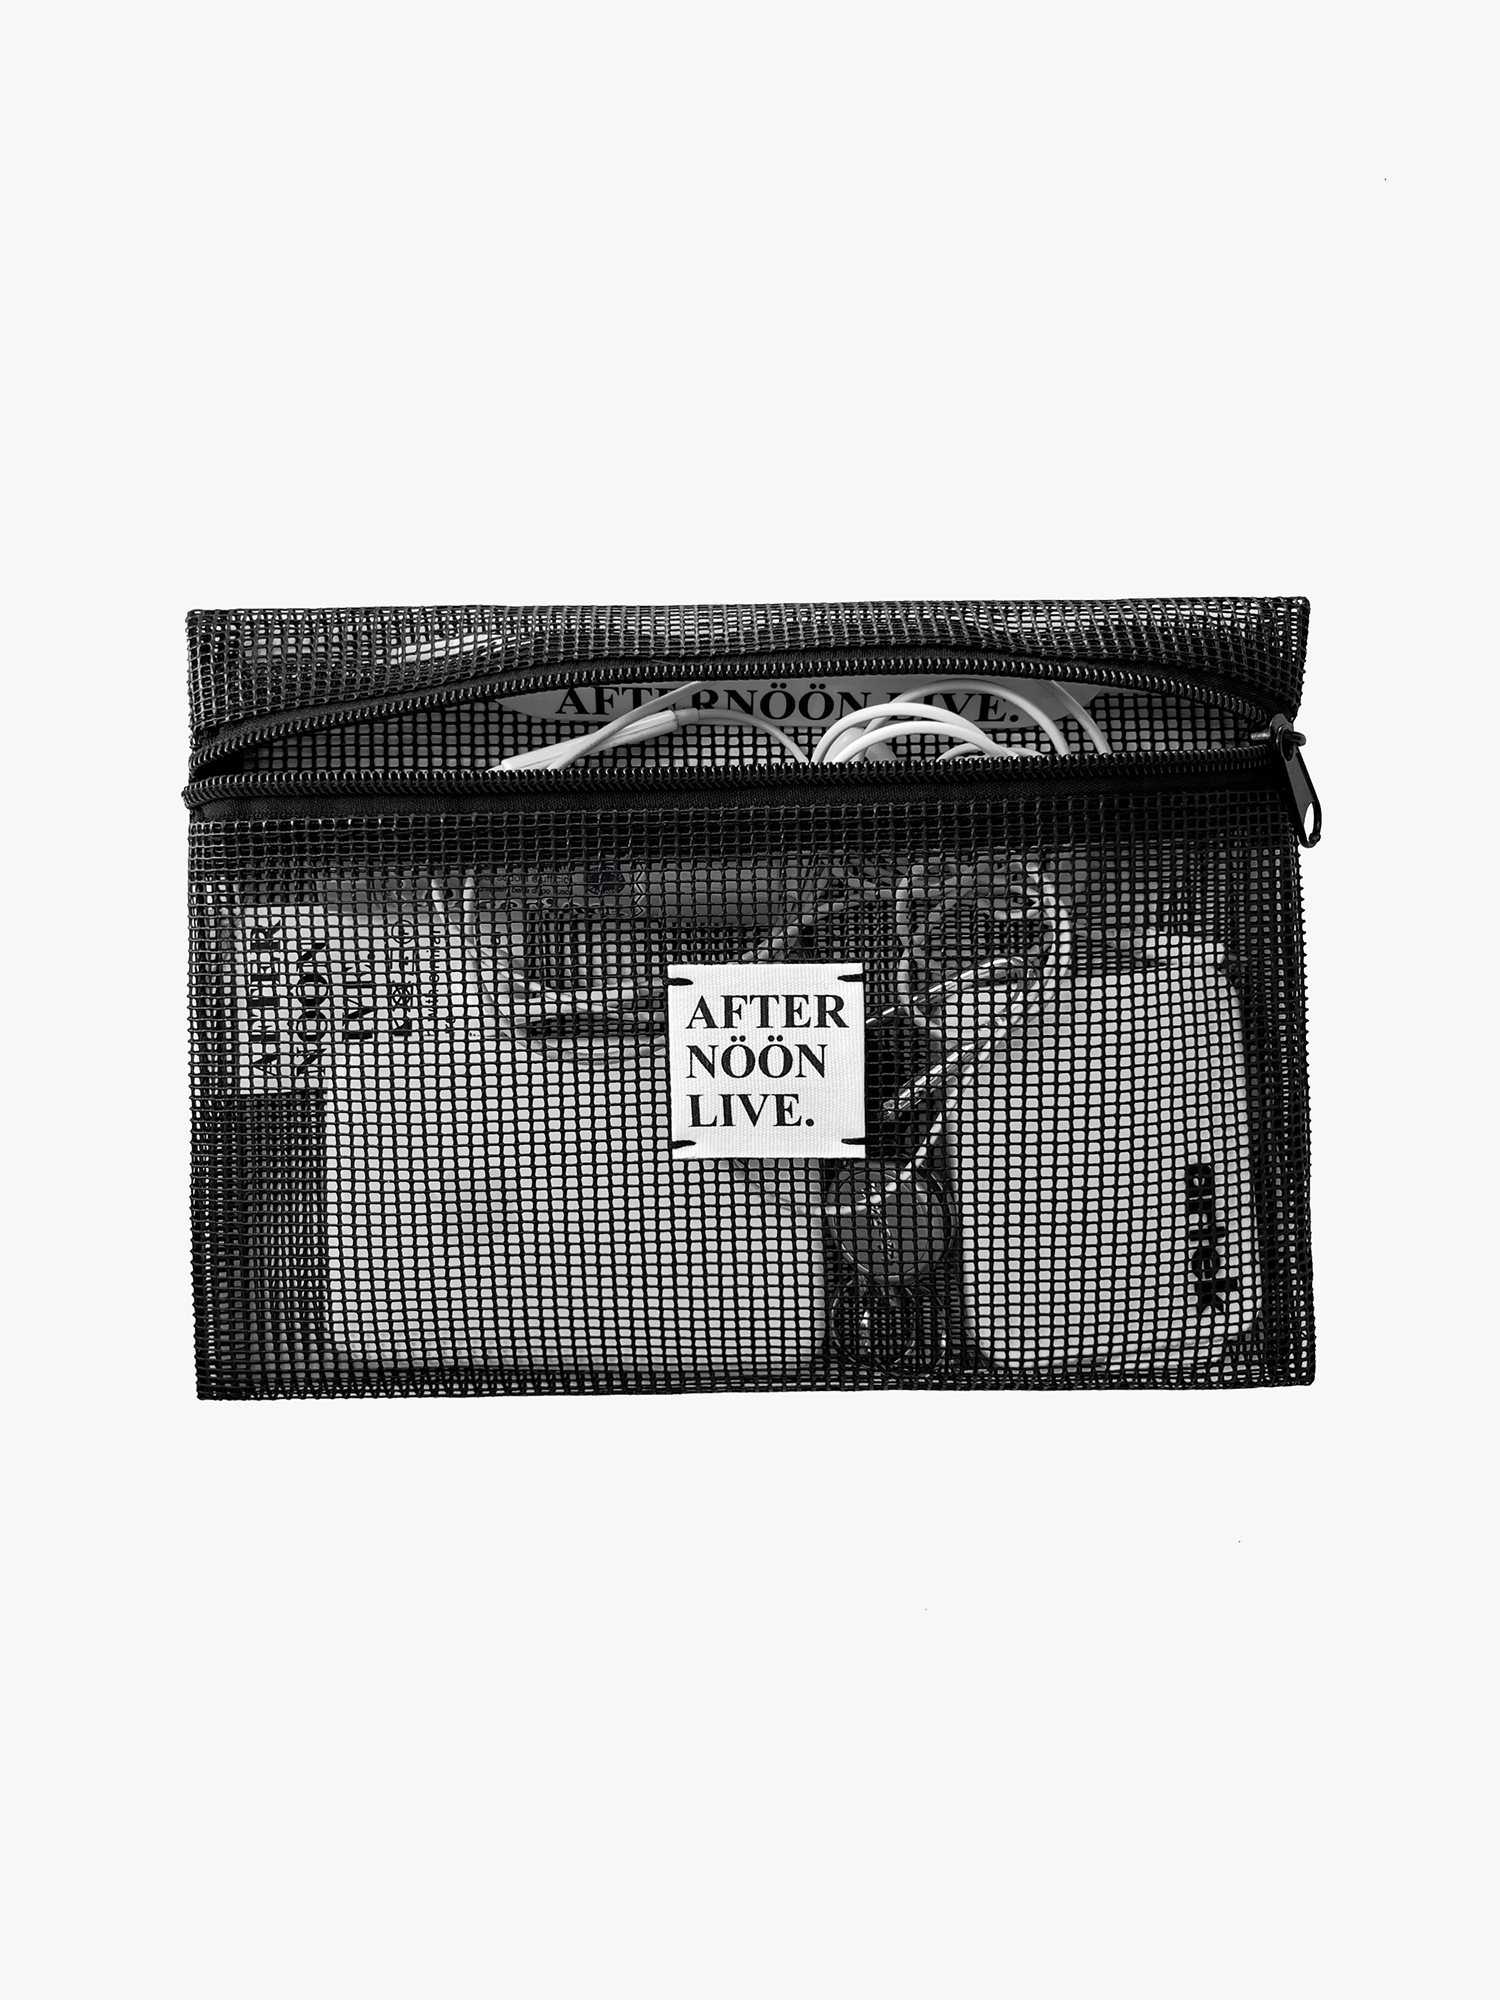 Afternoonlive Mesh Pouch